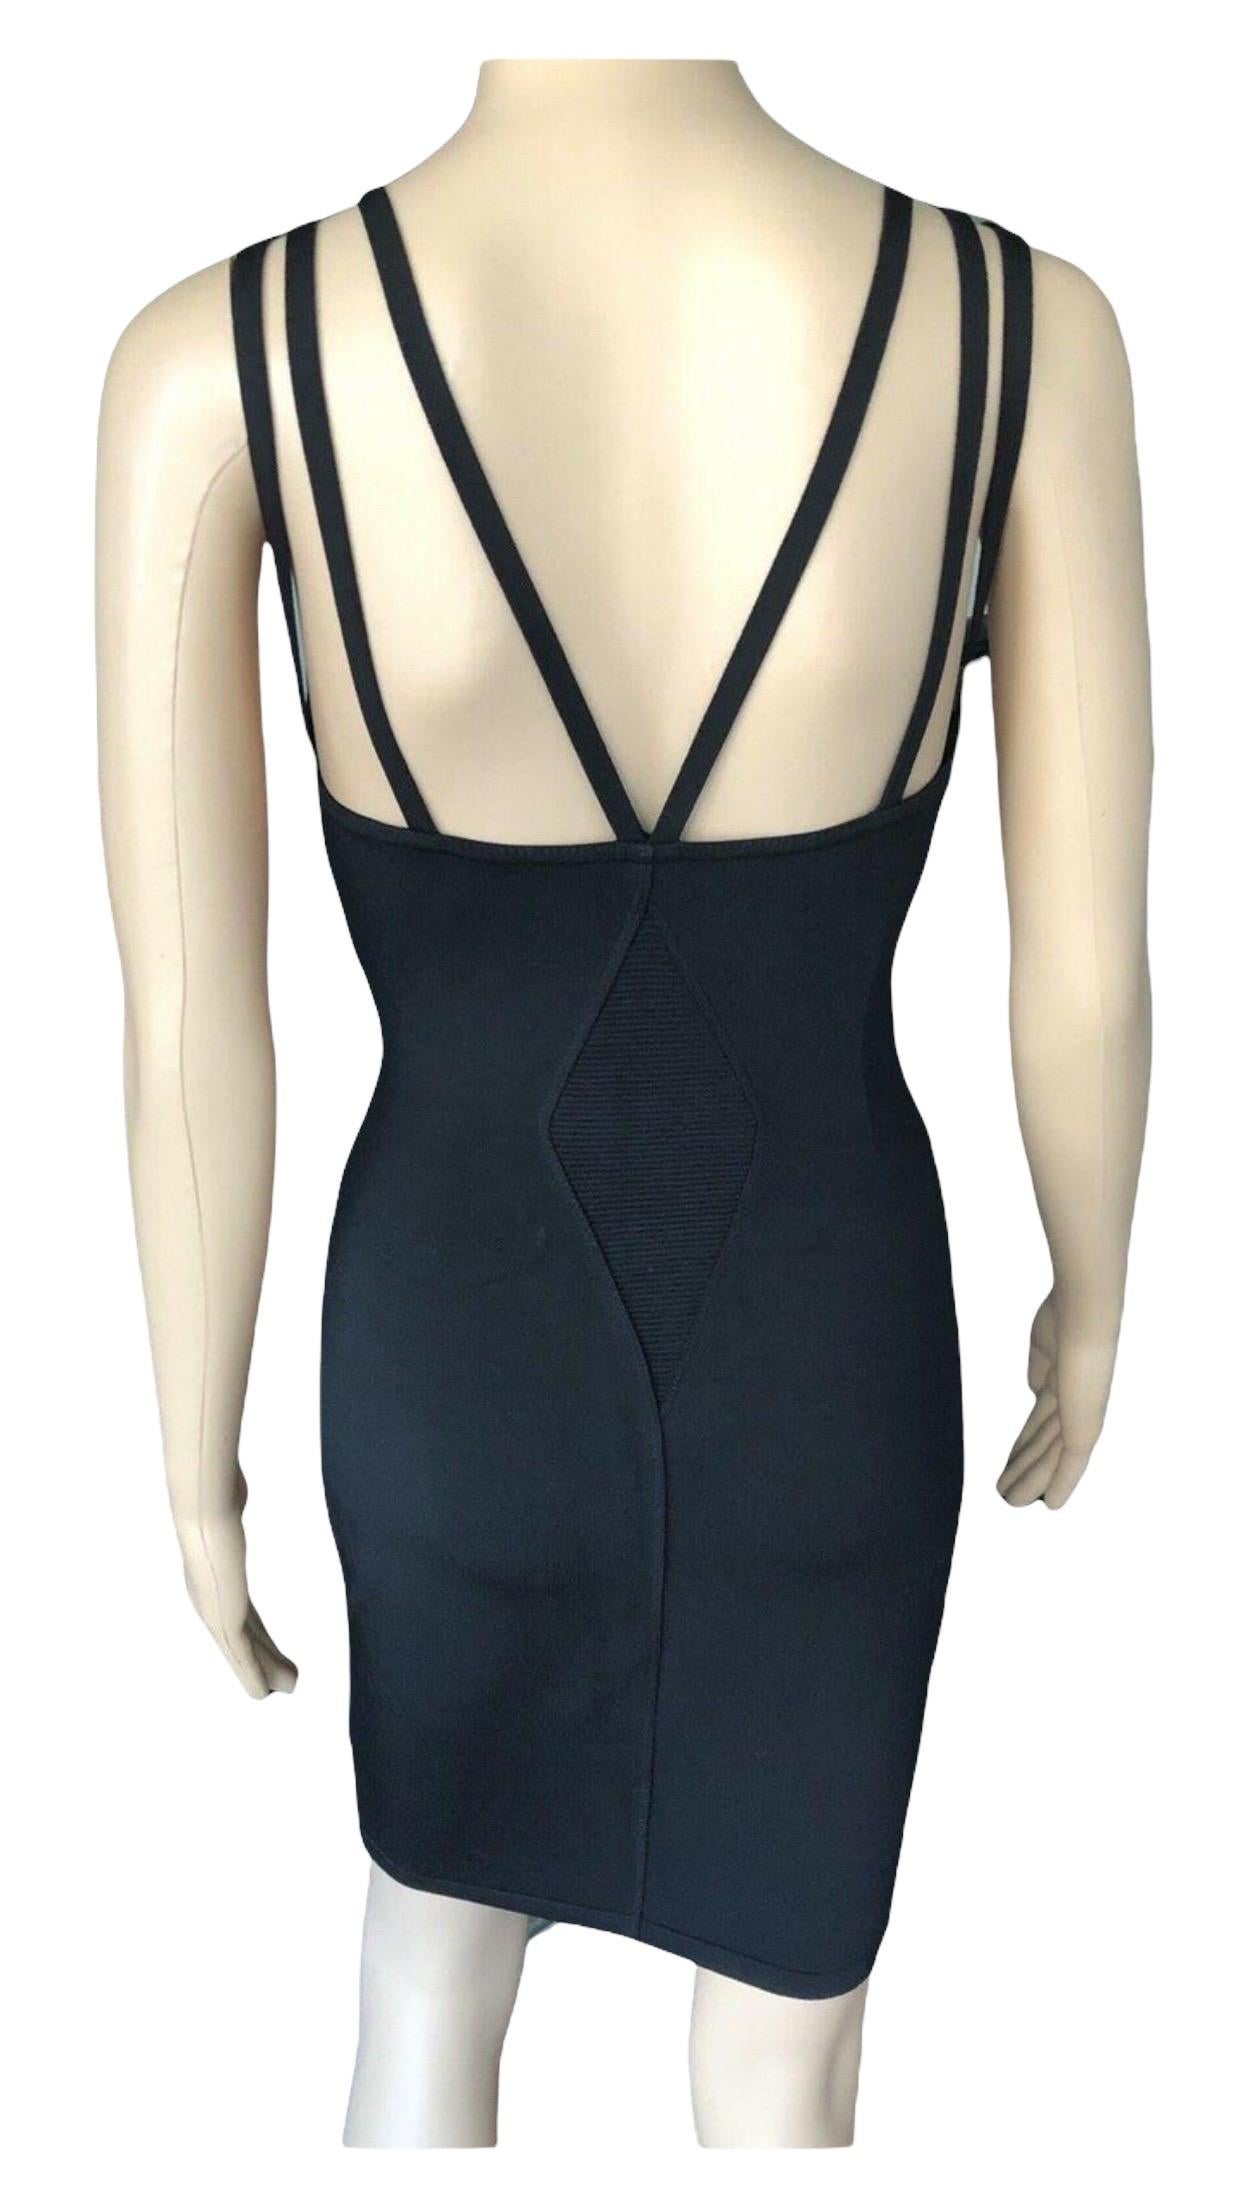 Azzedine Alaia S/S 1990 Vintage Black Bustier Fitted Dress  For Sale 3